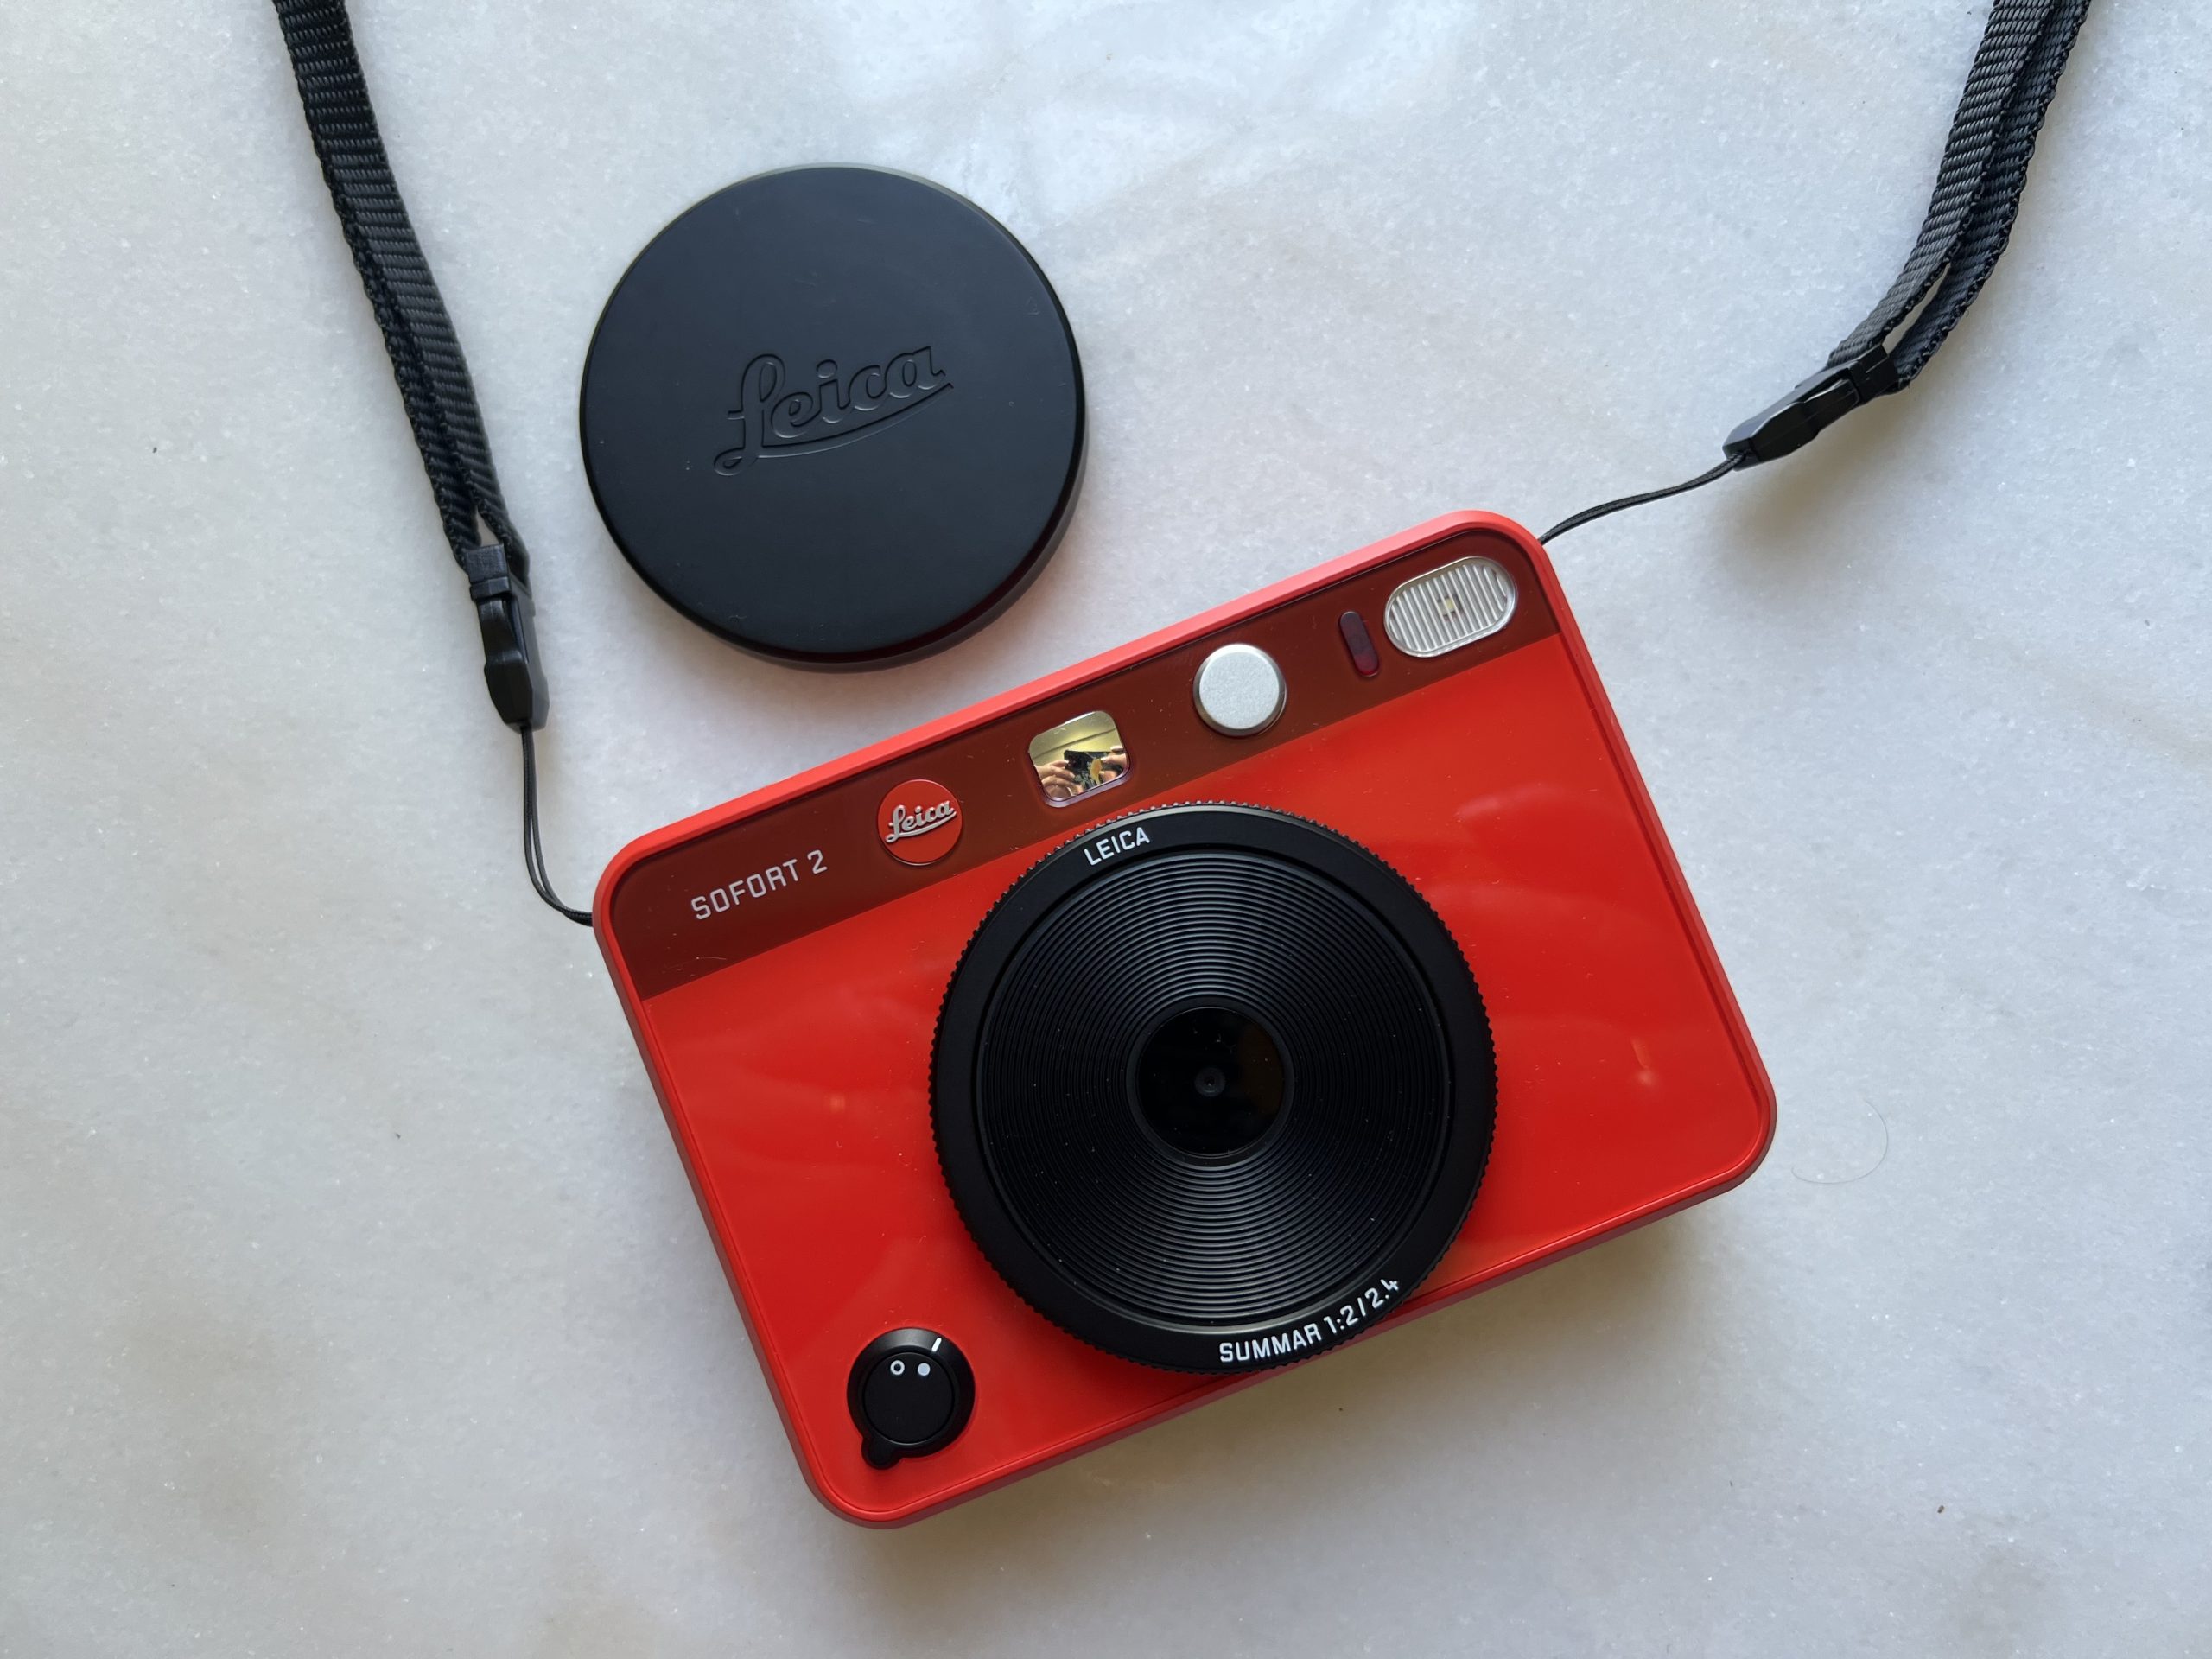 Exploring Mexico City with Leica’s New Sofort 2 Hybrid Instant Camera